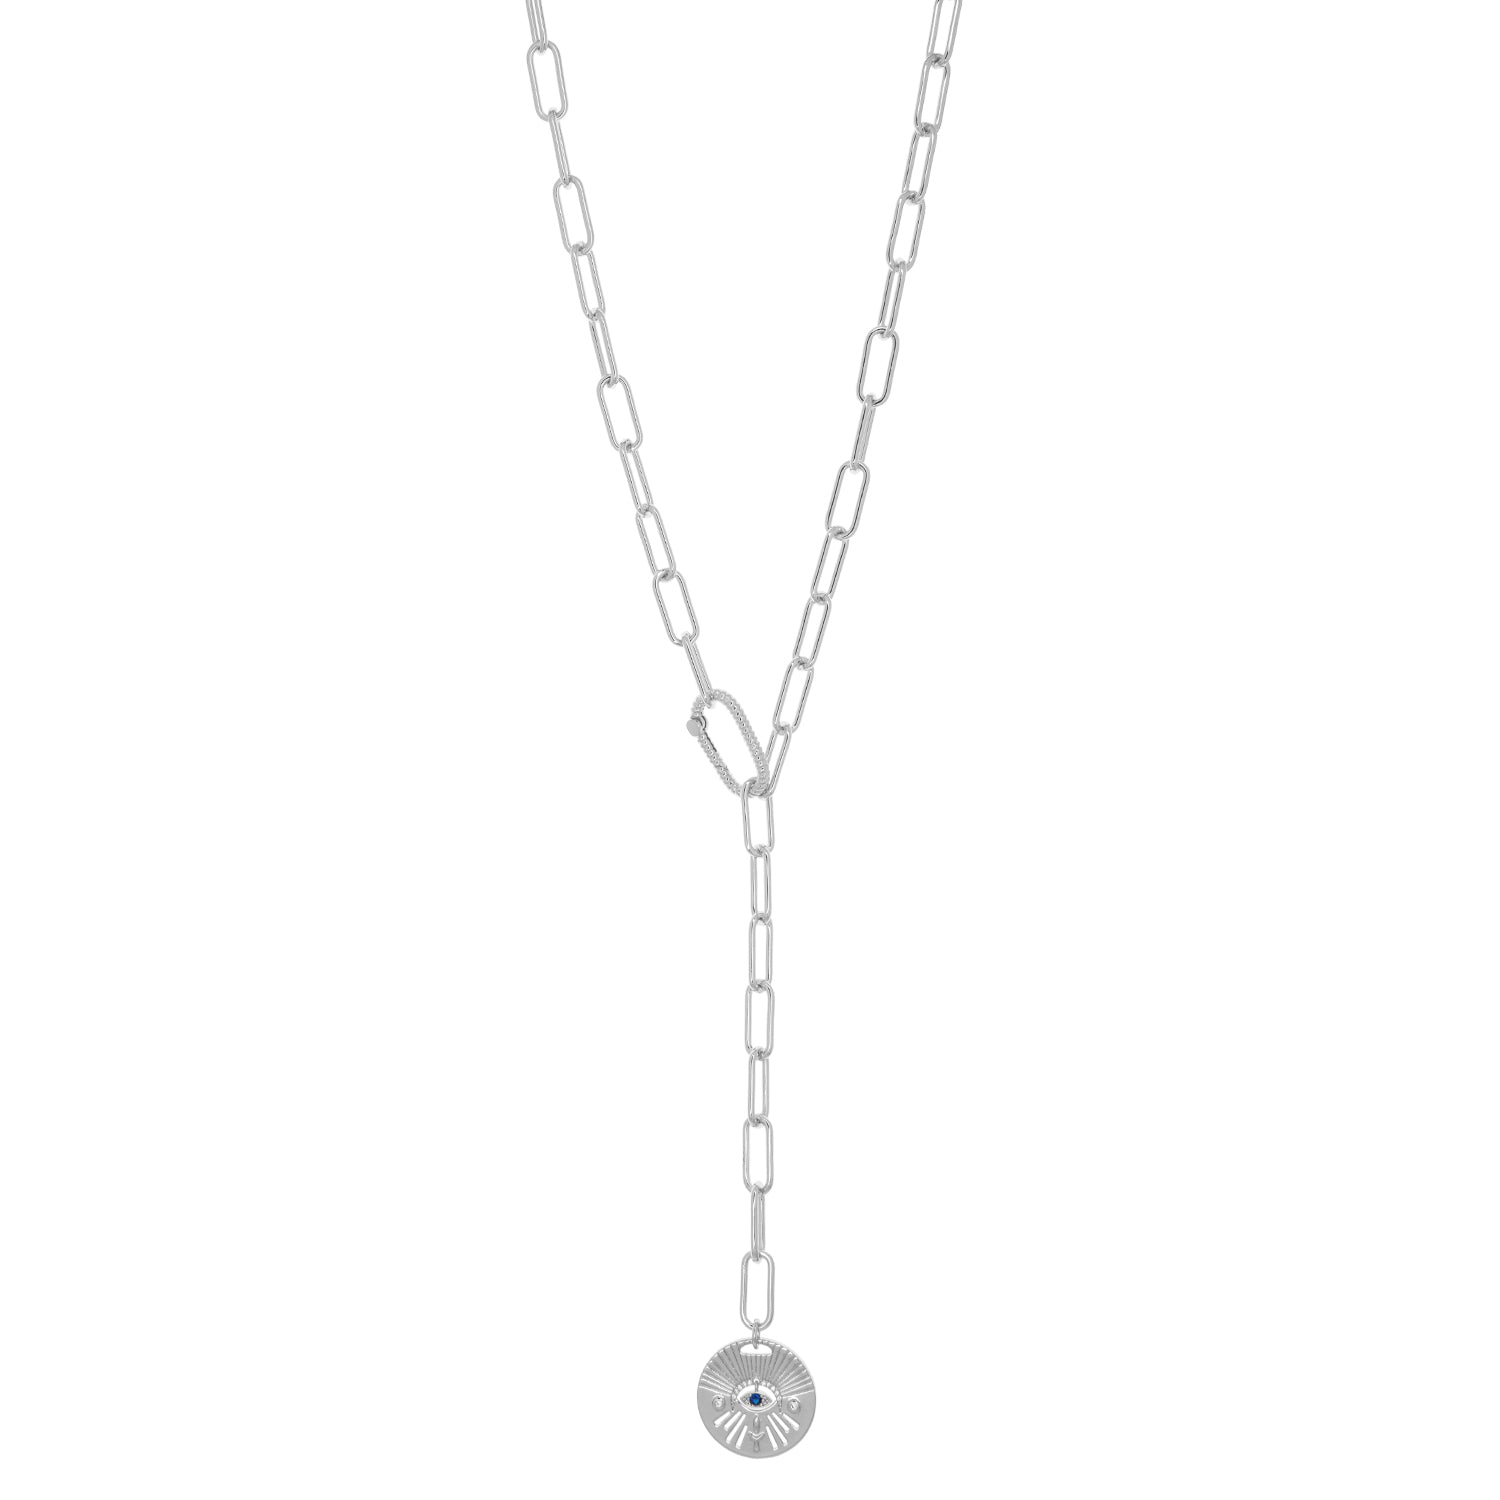 paperclip "Y" necklace with evil eye pendant